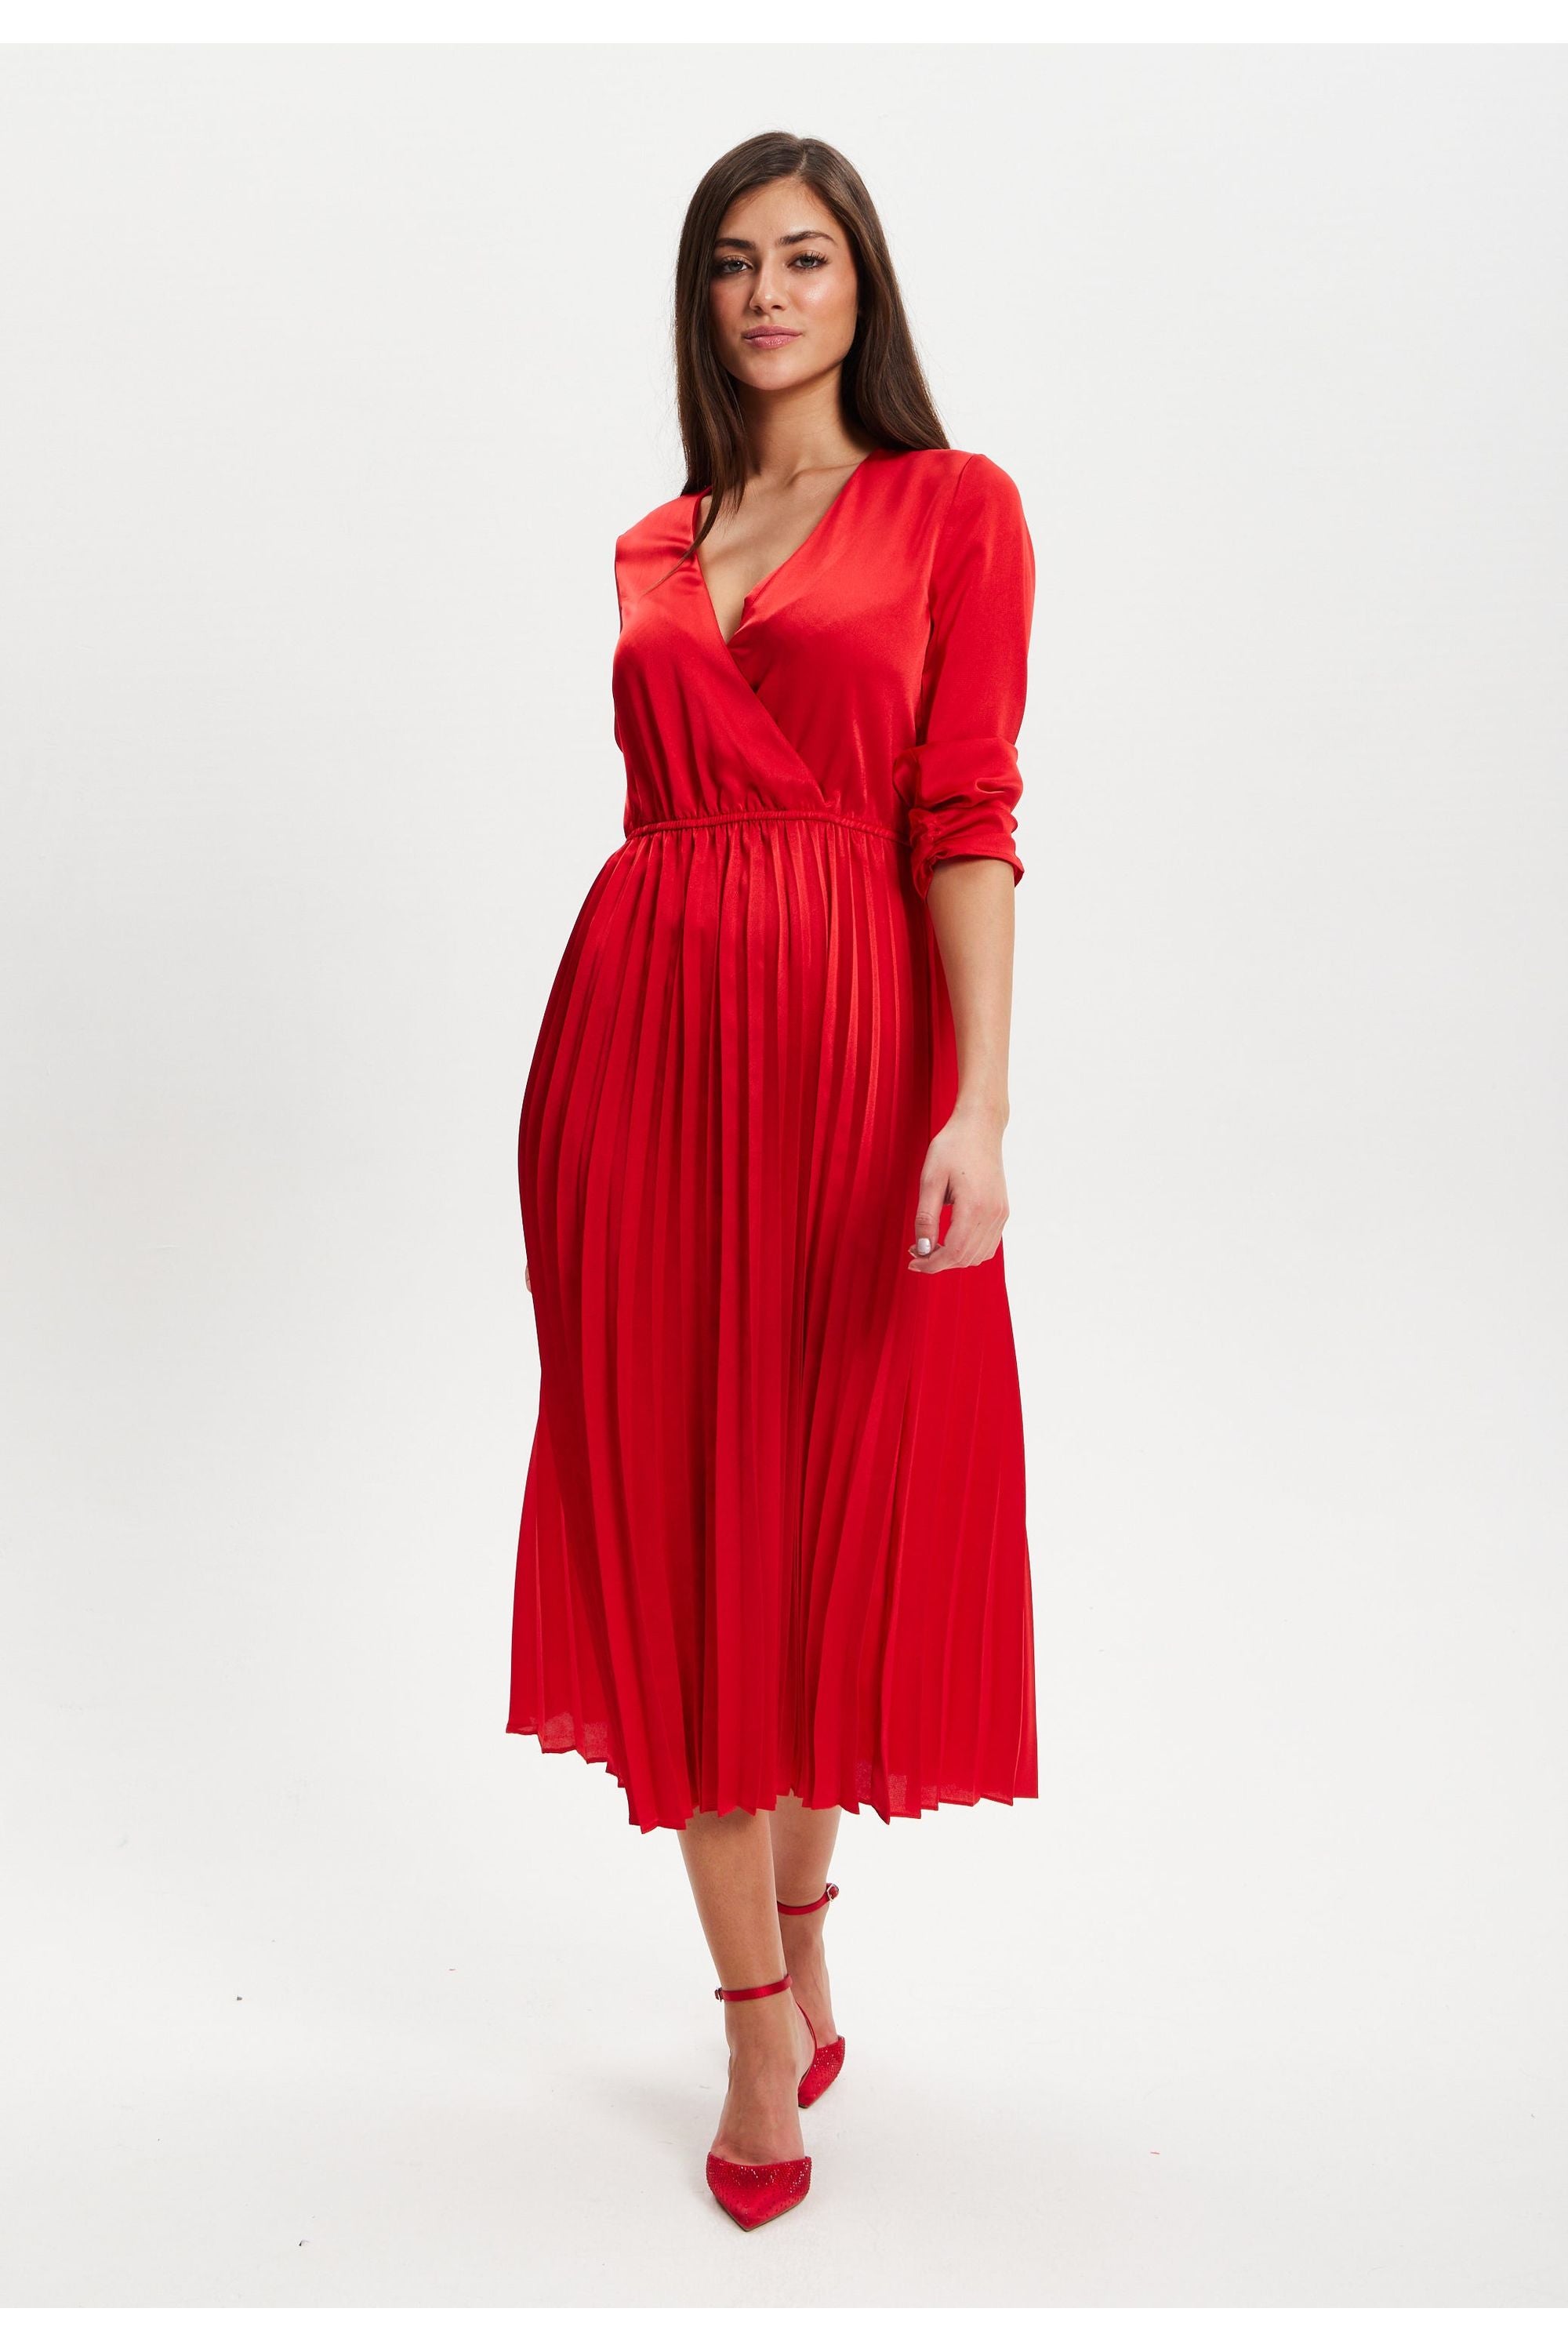 Red Midi Dress With Pleat Details EH1908Red